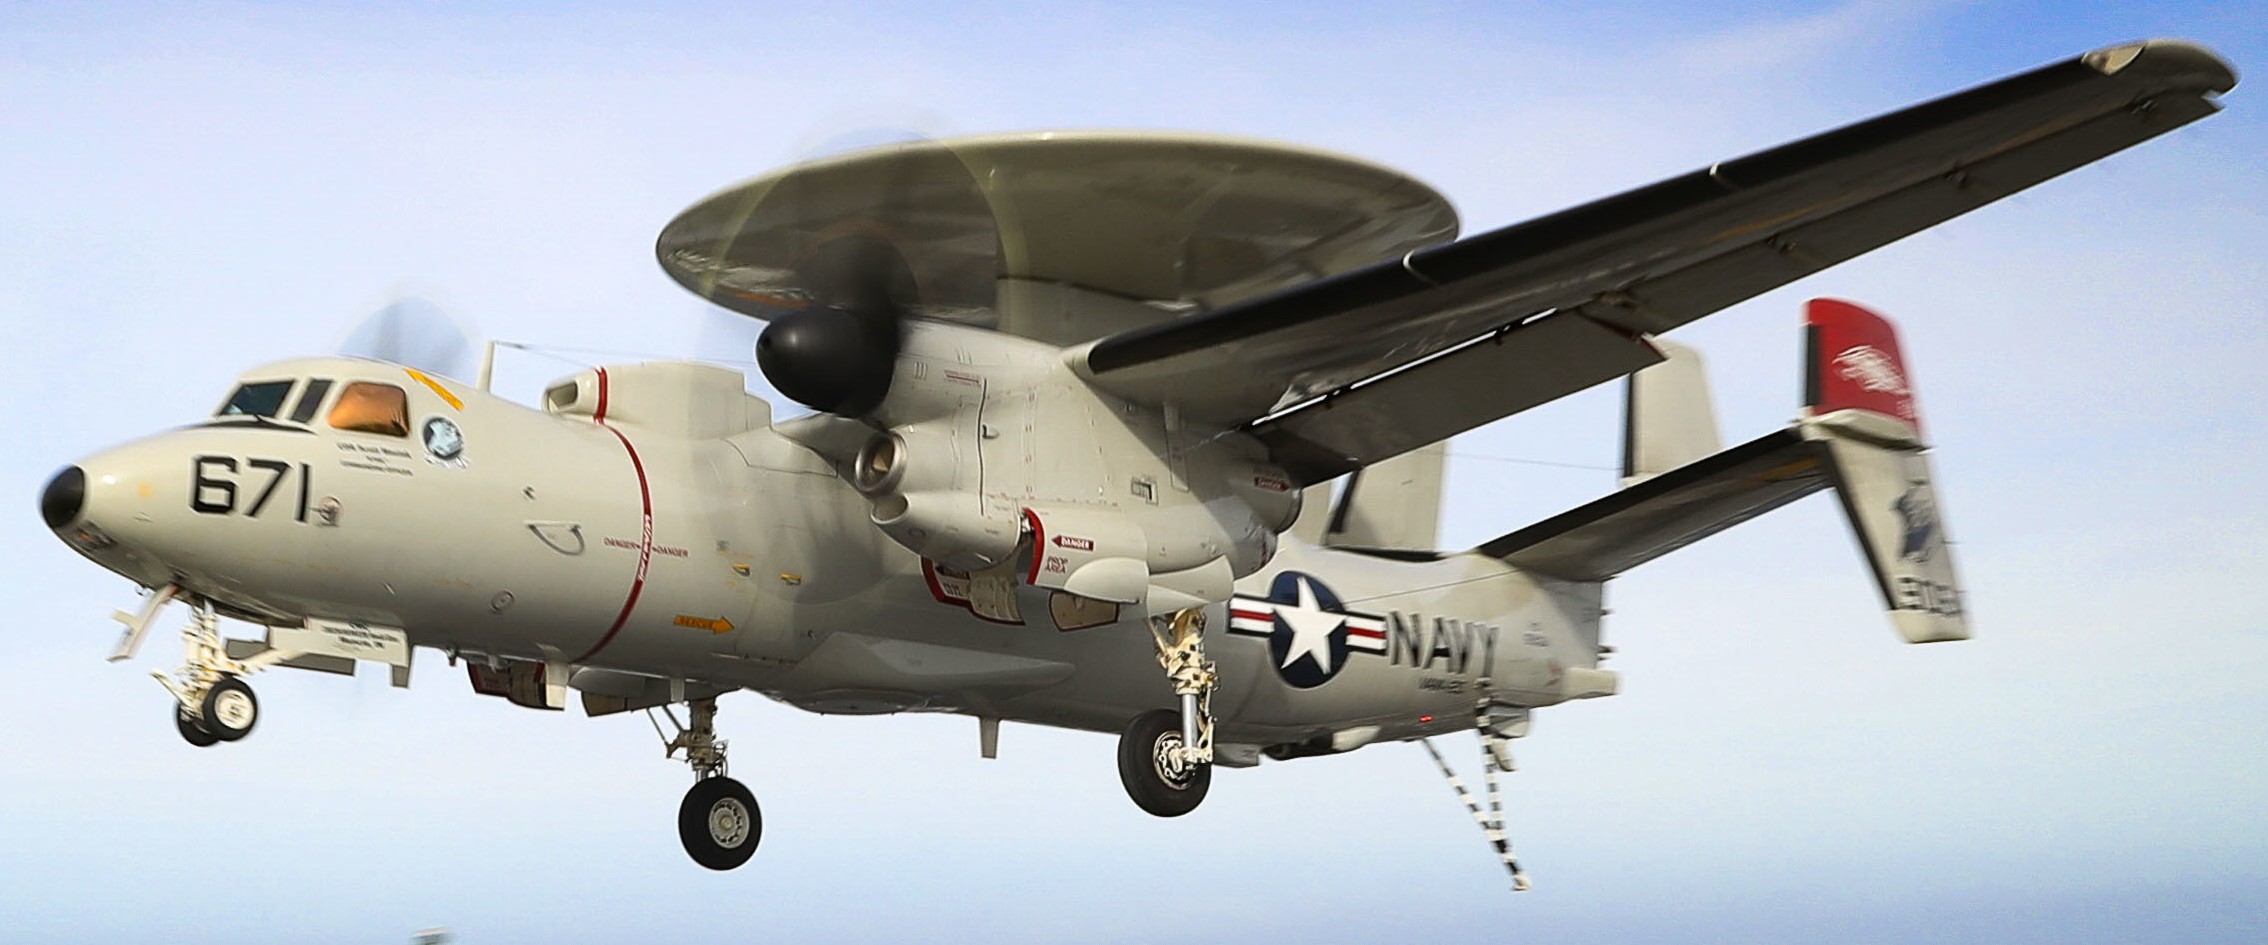 vaw-120 greyhawks carrier airborne early warning squadron e-2d advanced hawkeye replacement uss abraham lincoln cvn-72 62